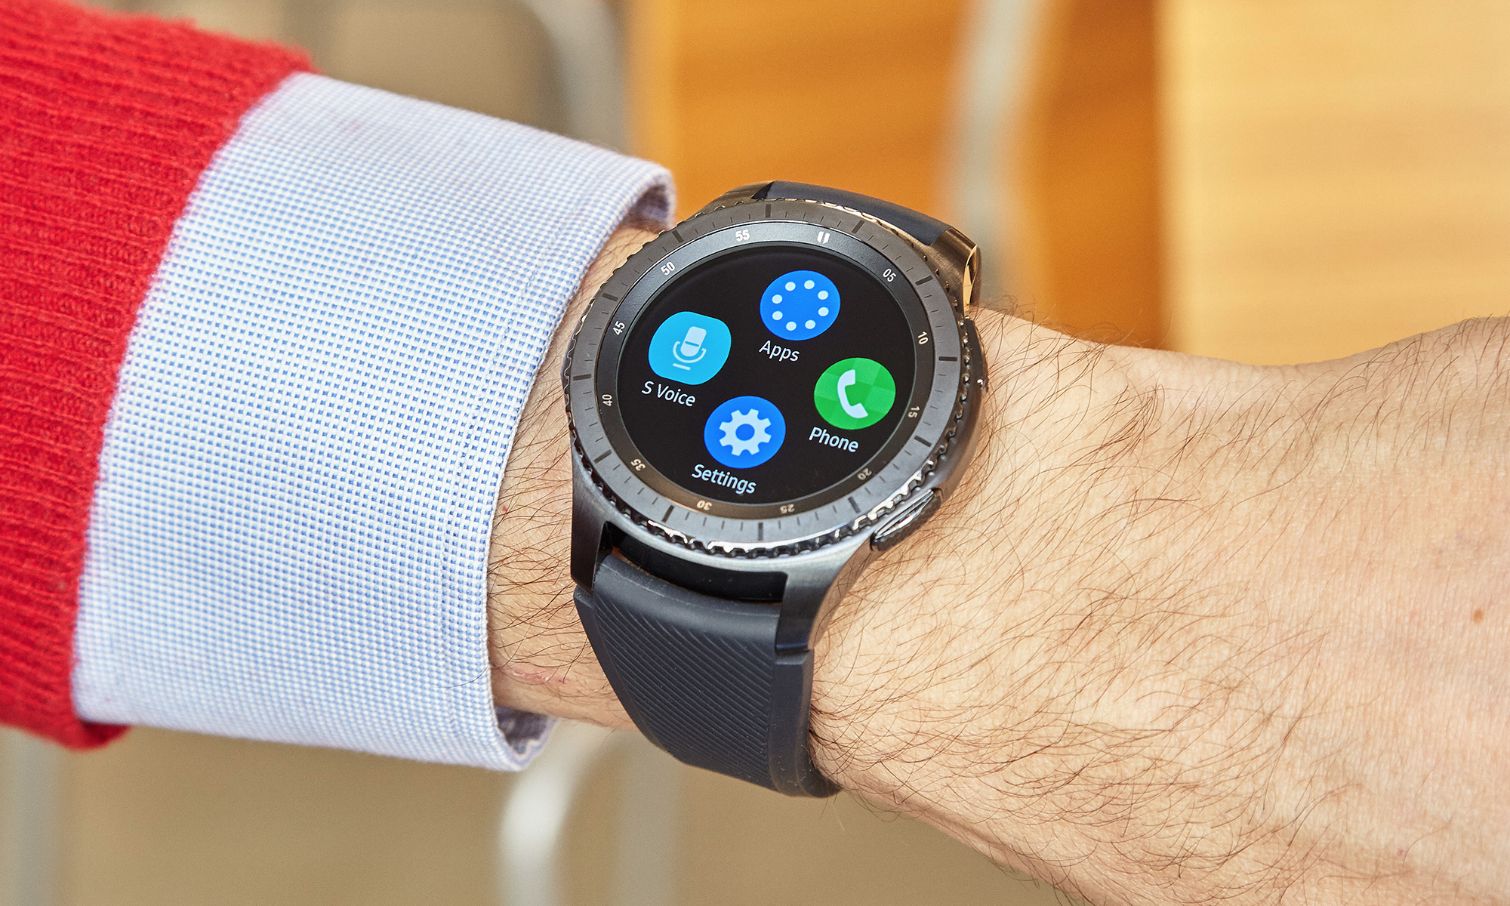 Samsung Gear S3 Frontier Review Why It's (Almost) the Best Smartwatch